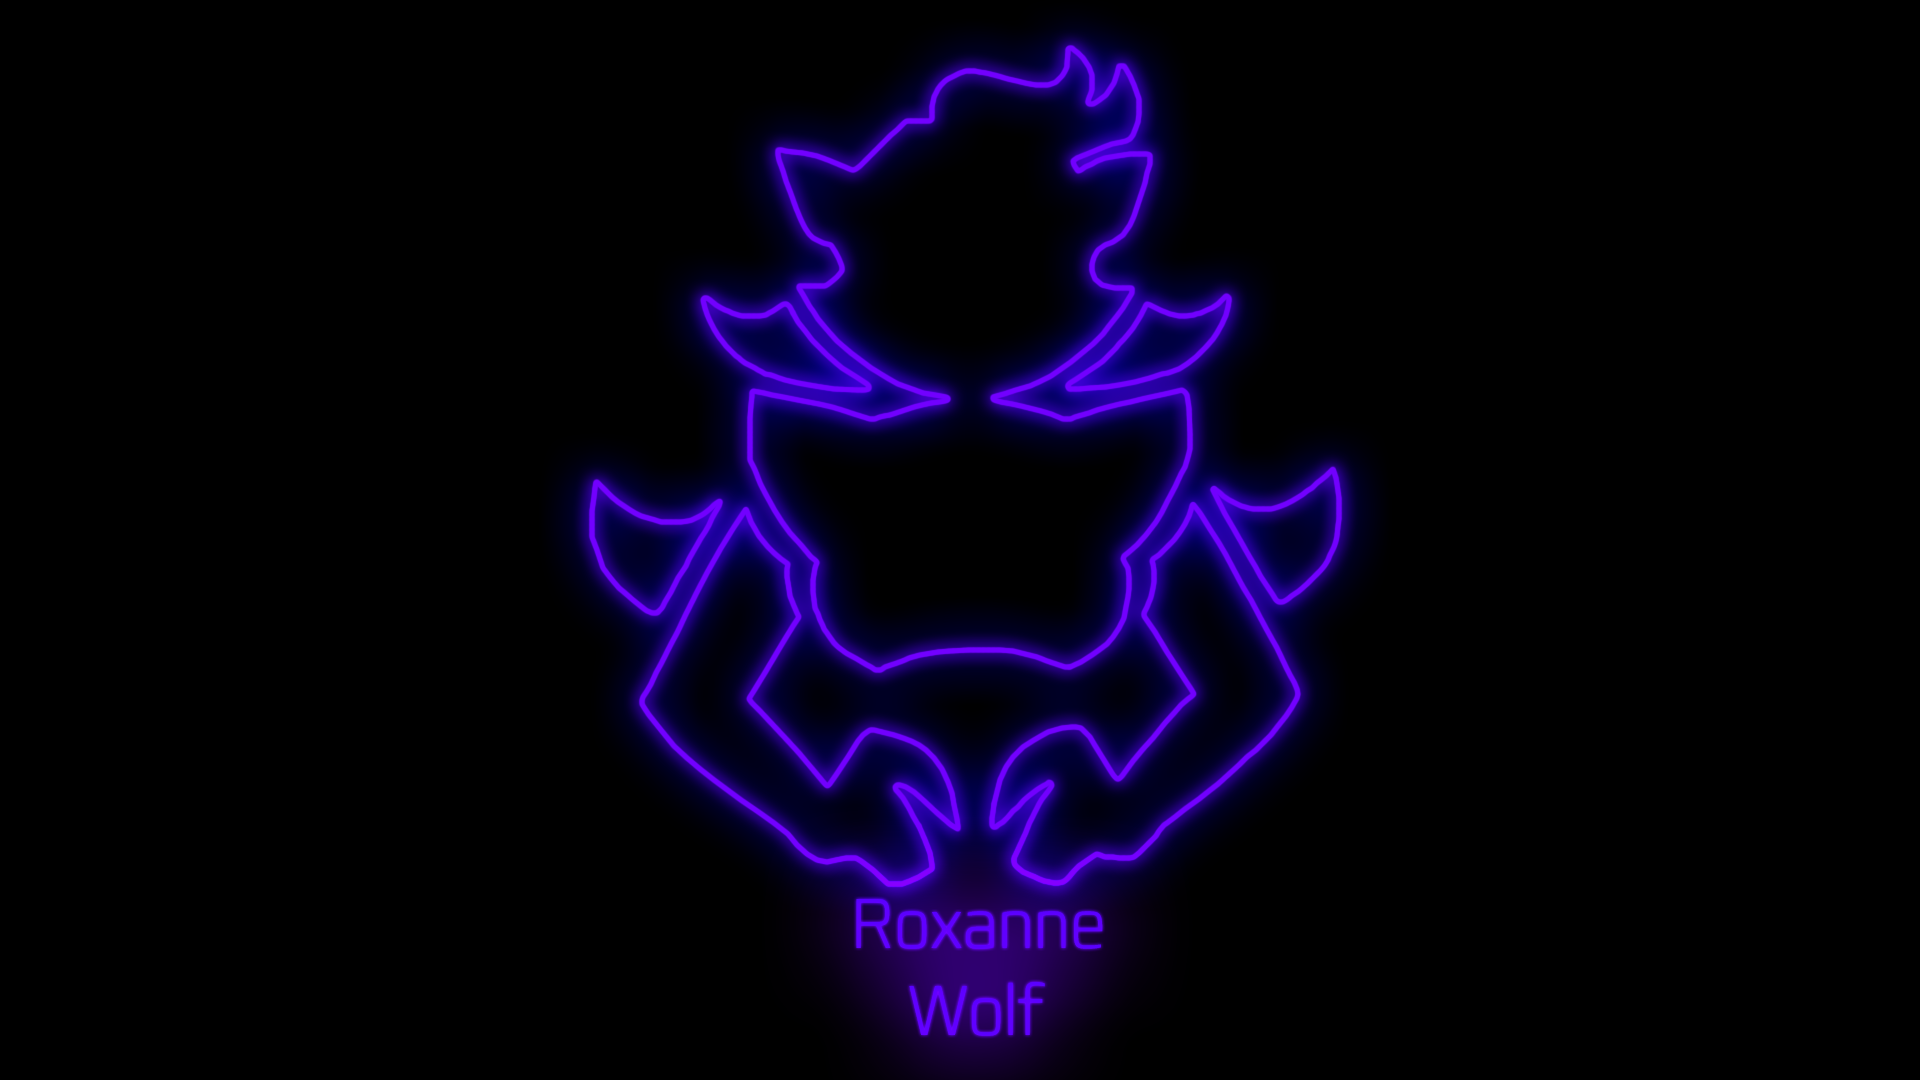 Roxanne Wolf Wallpaper Browse Roxanne Wolf Wallpaper with collections of  Art Fazbear Five Nights Fnaf Glamrock ht  Fnaf wallpapers Fnaf  drawings Anime fnaf